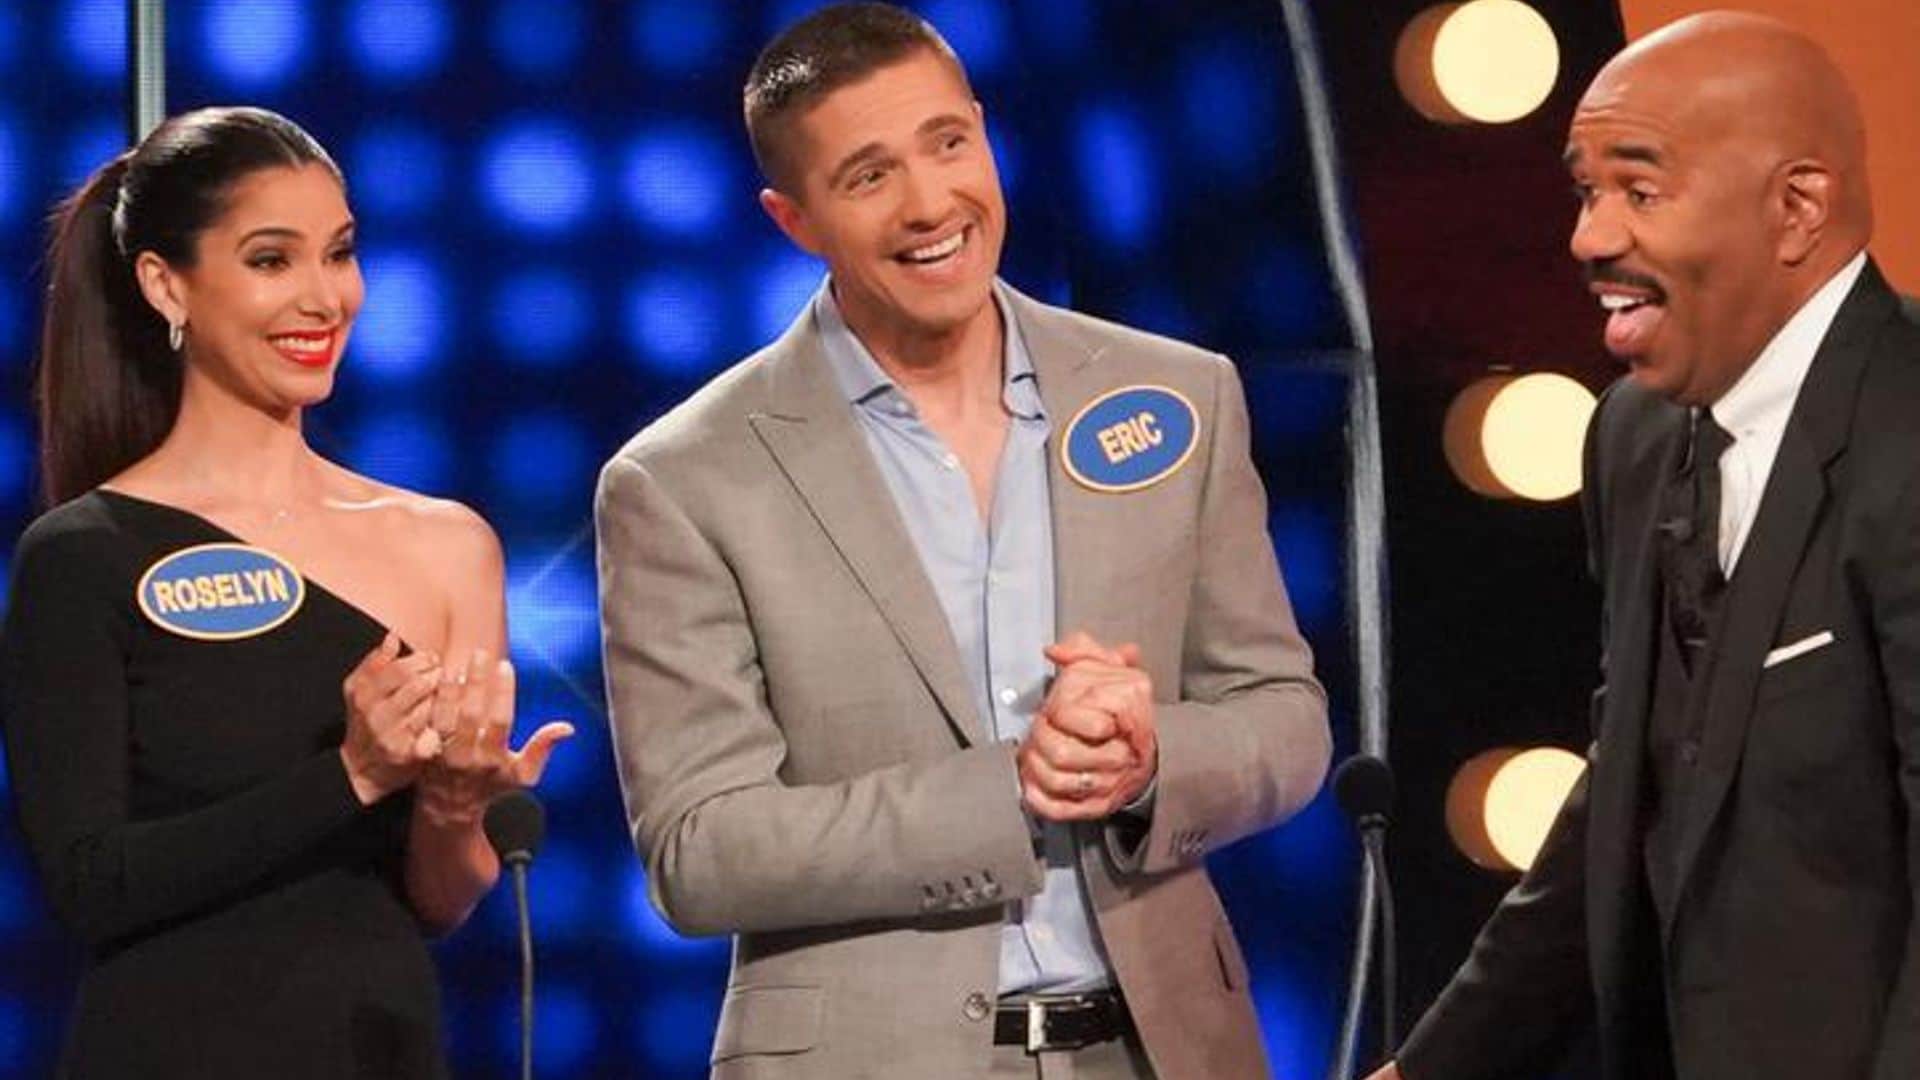 Did you catch Roselyn Sanchez and Eric Winter on Celebrity Family Feud?